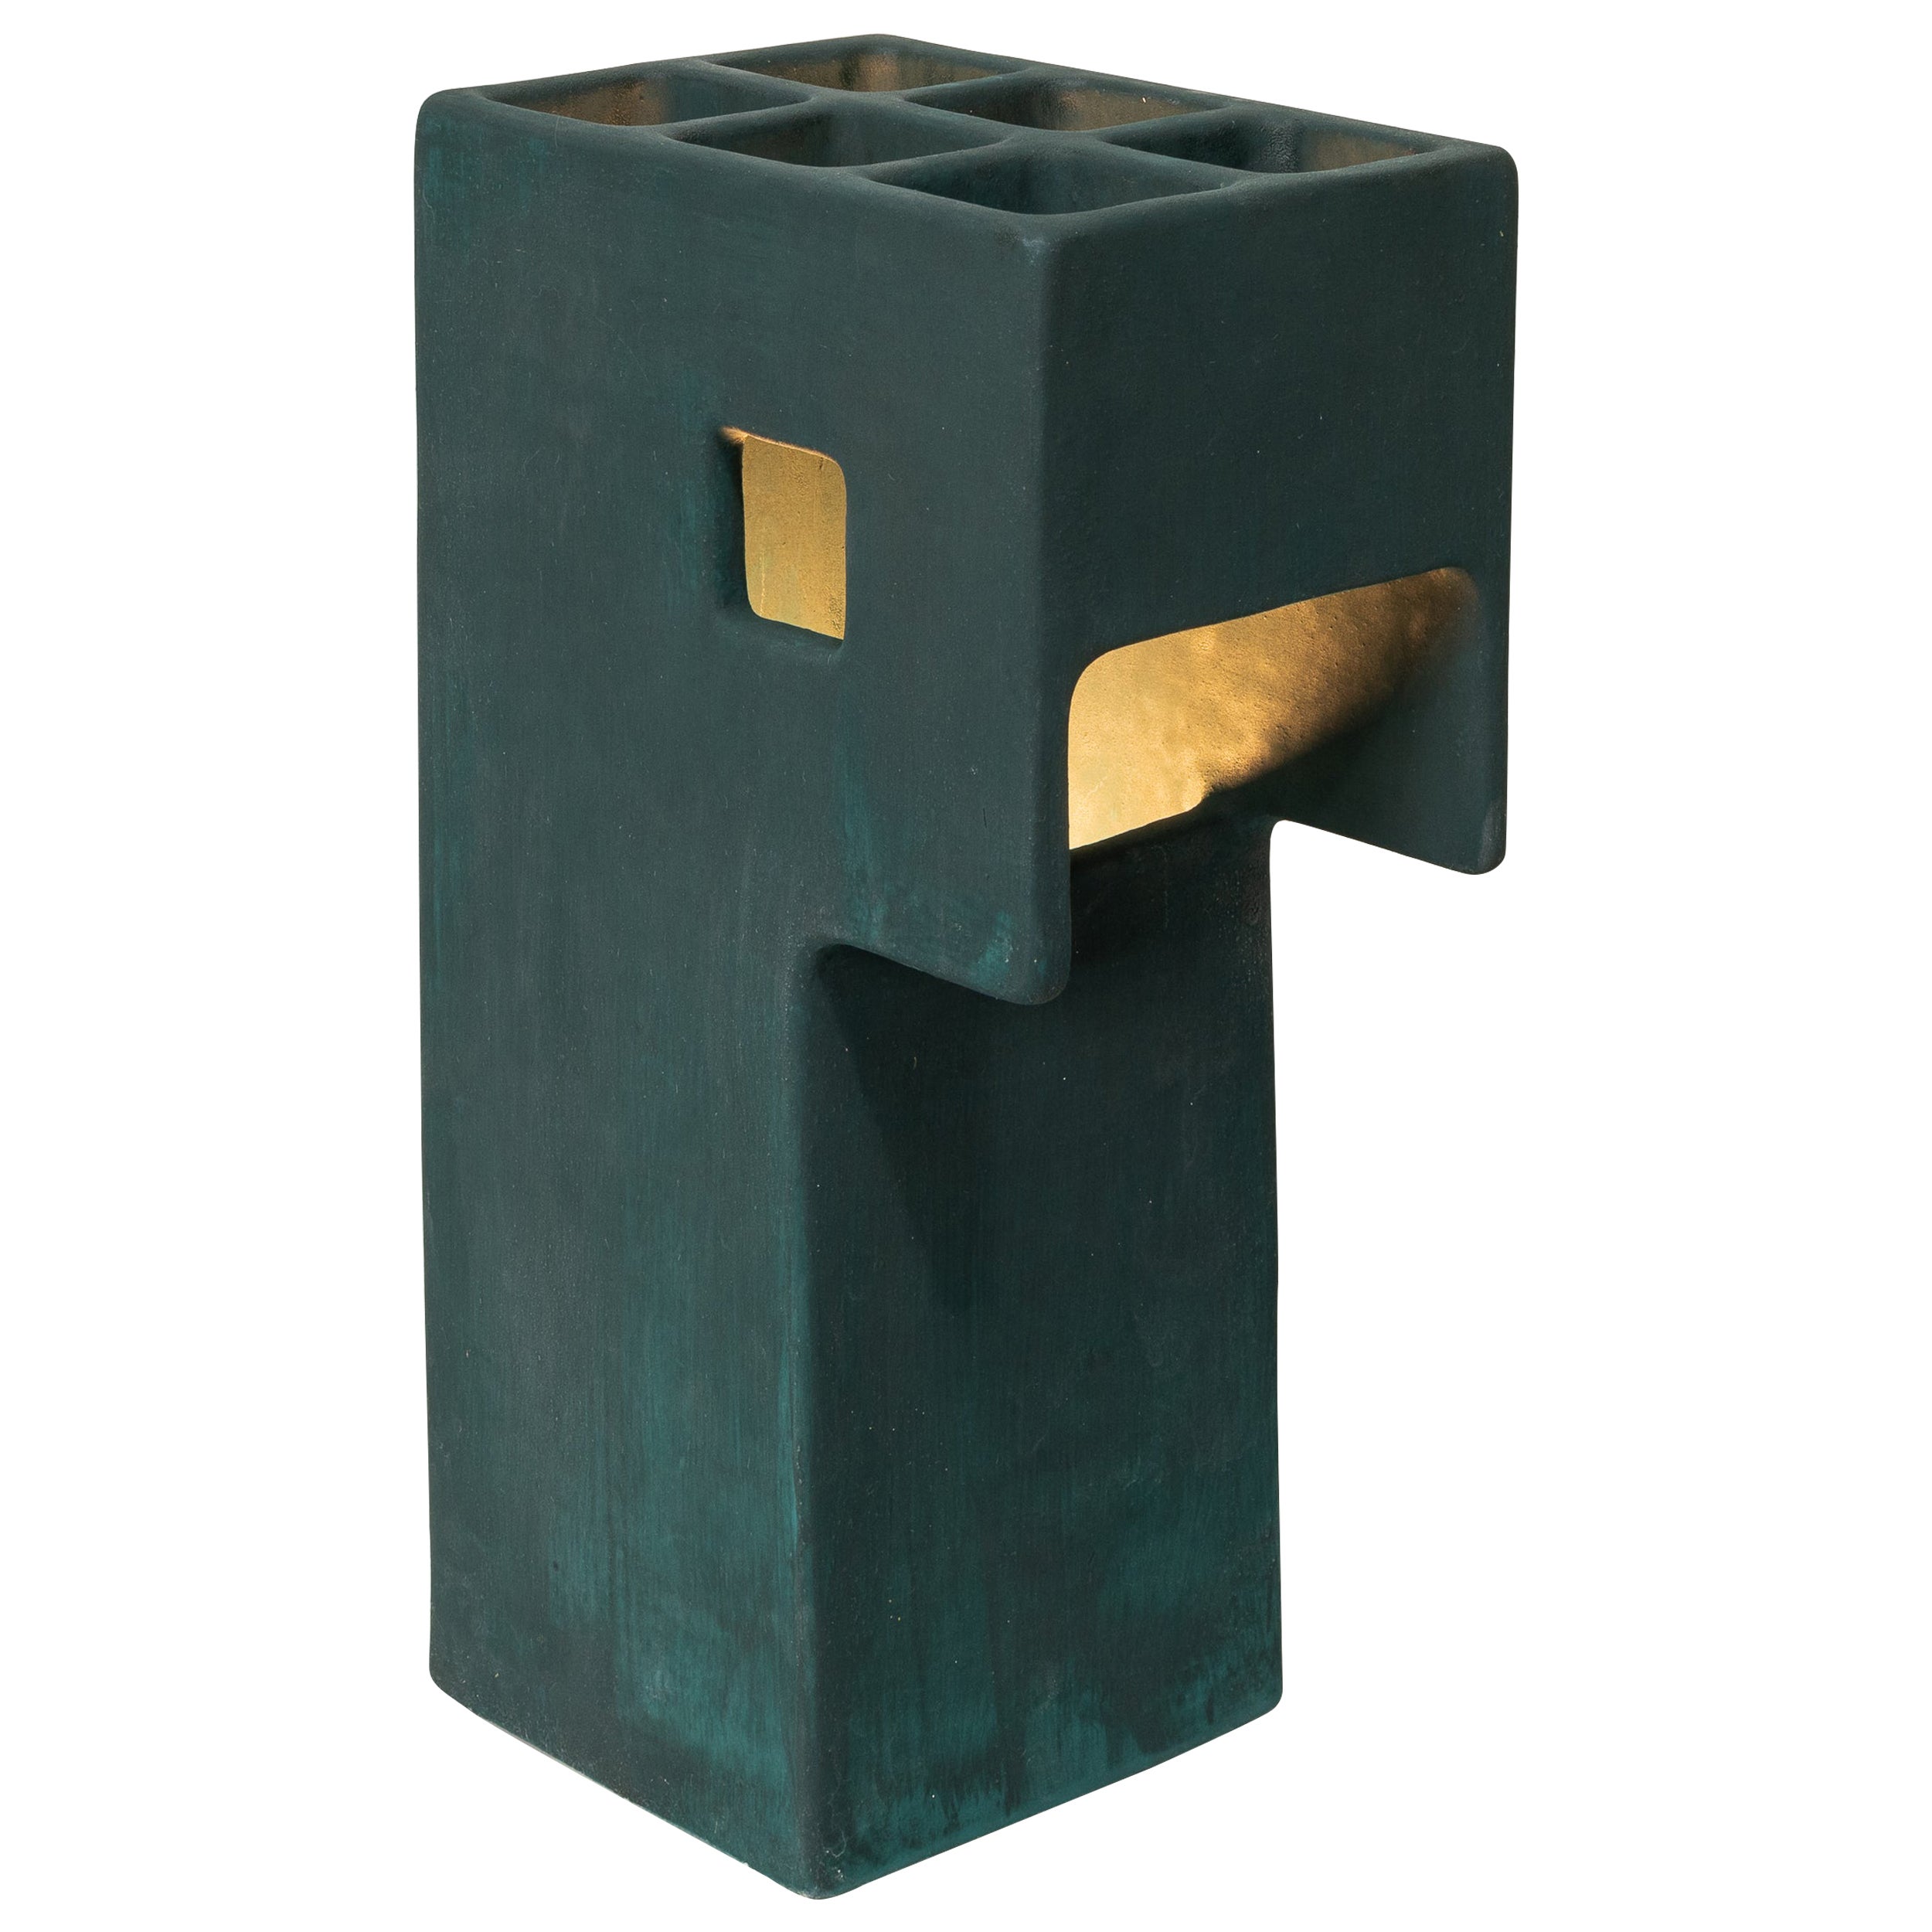 Ding Dong Table Lamp by Luft Tanaka, ceramic, dark green, brutalist, geometric